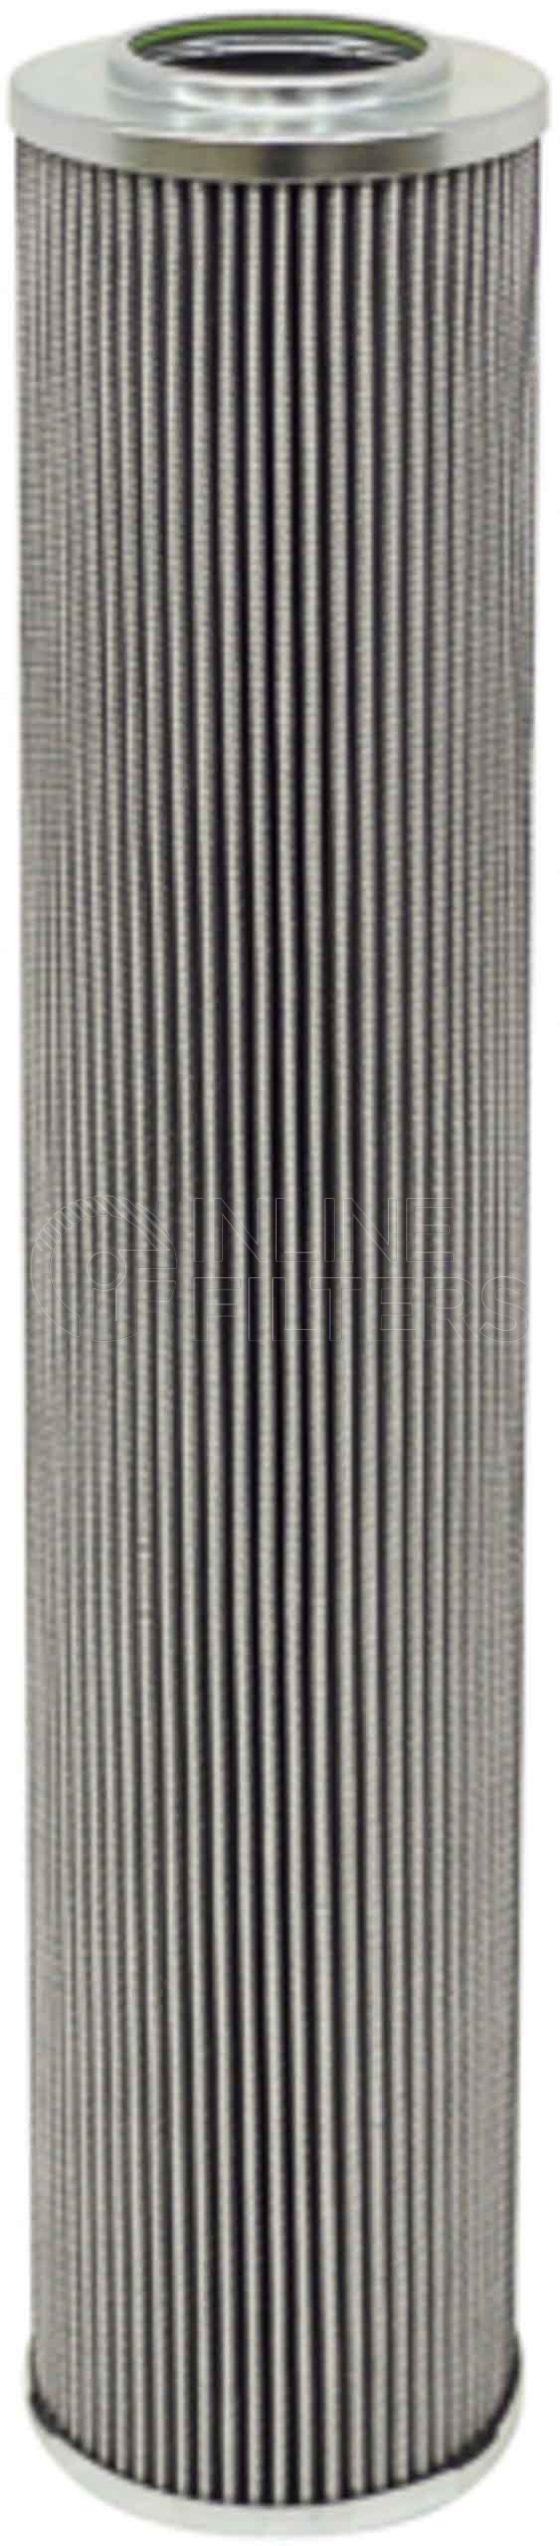 Baldwin PT23271-MPG. Baldwin – Hydraulic Filter Elements – PT23271-MPG Baldwin hydraulic elements offer superior protection for your engine-powered equipment. Application Pall Applications Outside Diameter 3 (76.2) Length 16 15/32 (418.3) Product Type Maximum Performance Glass Hydraulic Element Compatible Competitor Part Number Pall HC9600FDS16Z, HC9600FKS16Z, HC9600FUS16Z Inside Diameter 1 11/32 (34.1) One End Brand Baldwin Division Engine Mobile […]